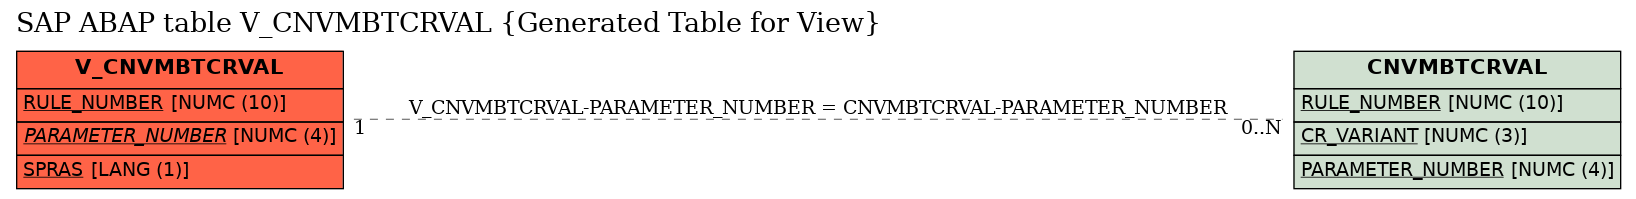 E-R Diagram for table V_CNVMBTCRVAL (Generated Table for View)